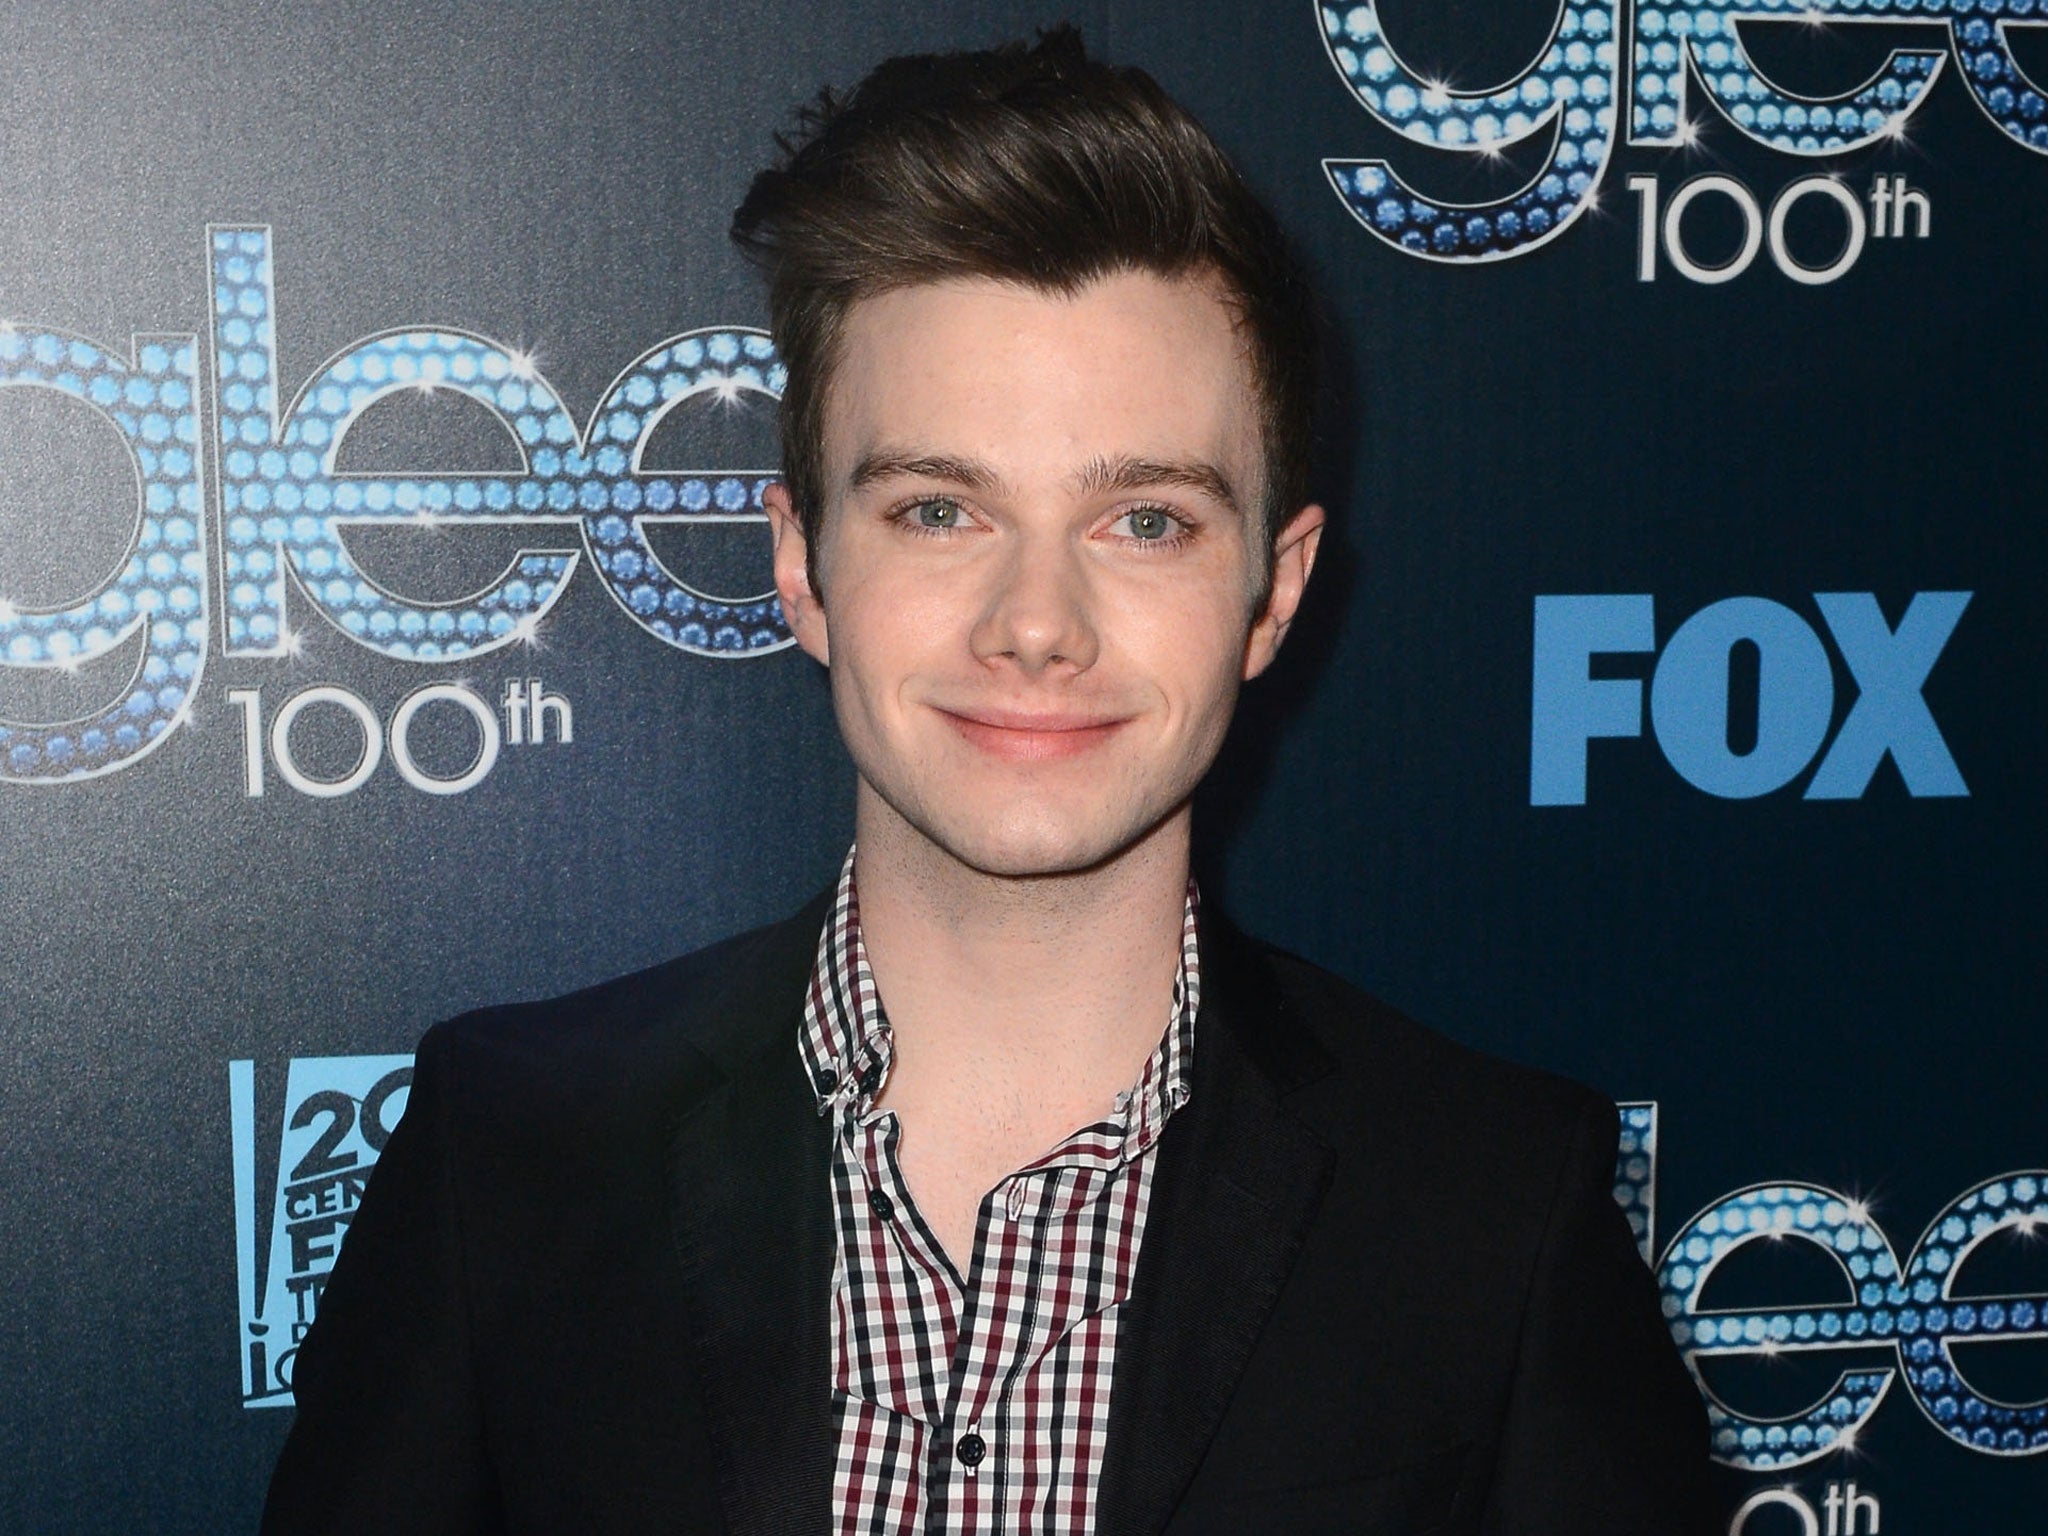 Actor Chris Colfer pictured attending Fox's 'GLEE' 100th Episode Celebration held at Chateau Marmont on March 18, 2014 in Los Angeles, California.